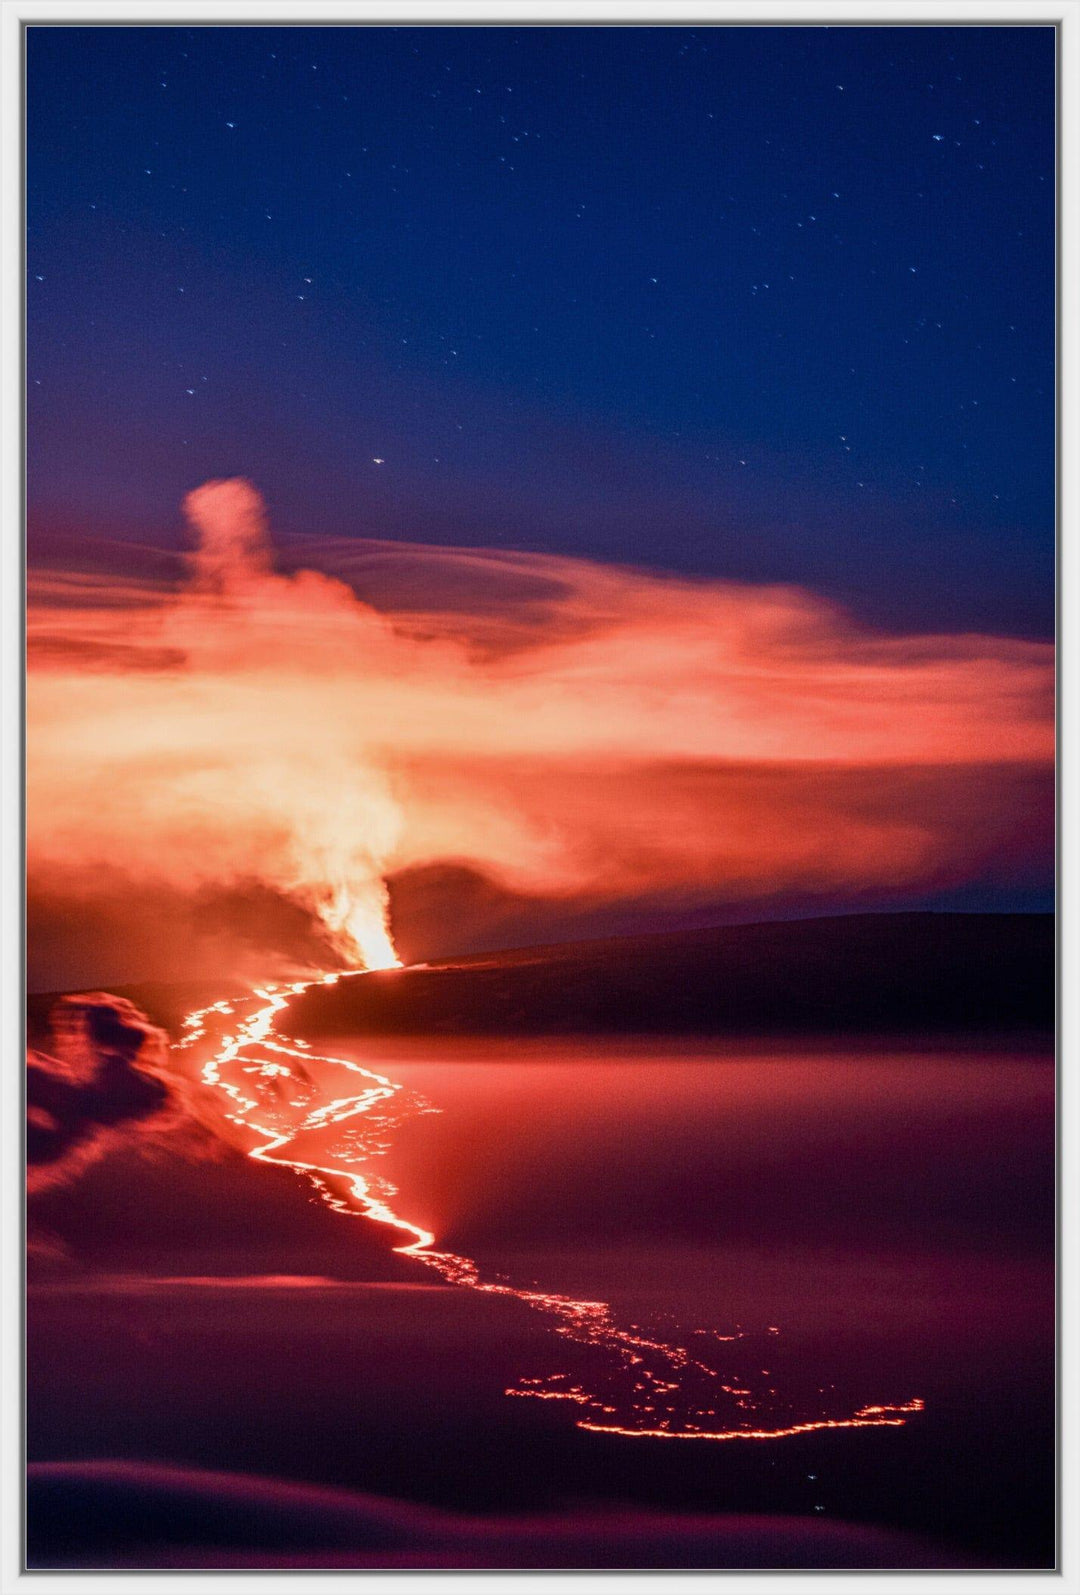 Nocturnal Inferno | Mauna Loa's 2022 Eruption - Living Moments Media - 3500-5500, 800-3500, Acrylic, Artwork, Best Wall Artwork, Big Island, black, blue, Canvas, clouds, Hawaii, Hawaii Island, Island, maui, Maui Hawaii Fine Art Photography, Maui Hawaii Wall Art, Mauna Loa, Metal, Mountains, New Moments, open-edition, orange, over-5500, Prints, Purple, size-16-x-24, size-24-x-36, size-40-x-60, Stars, Sunrise, vertical, Visual Artwork, yellow